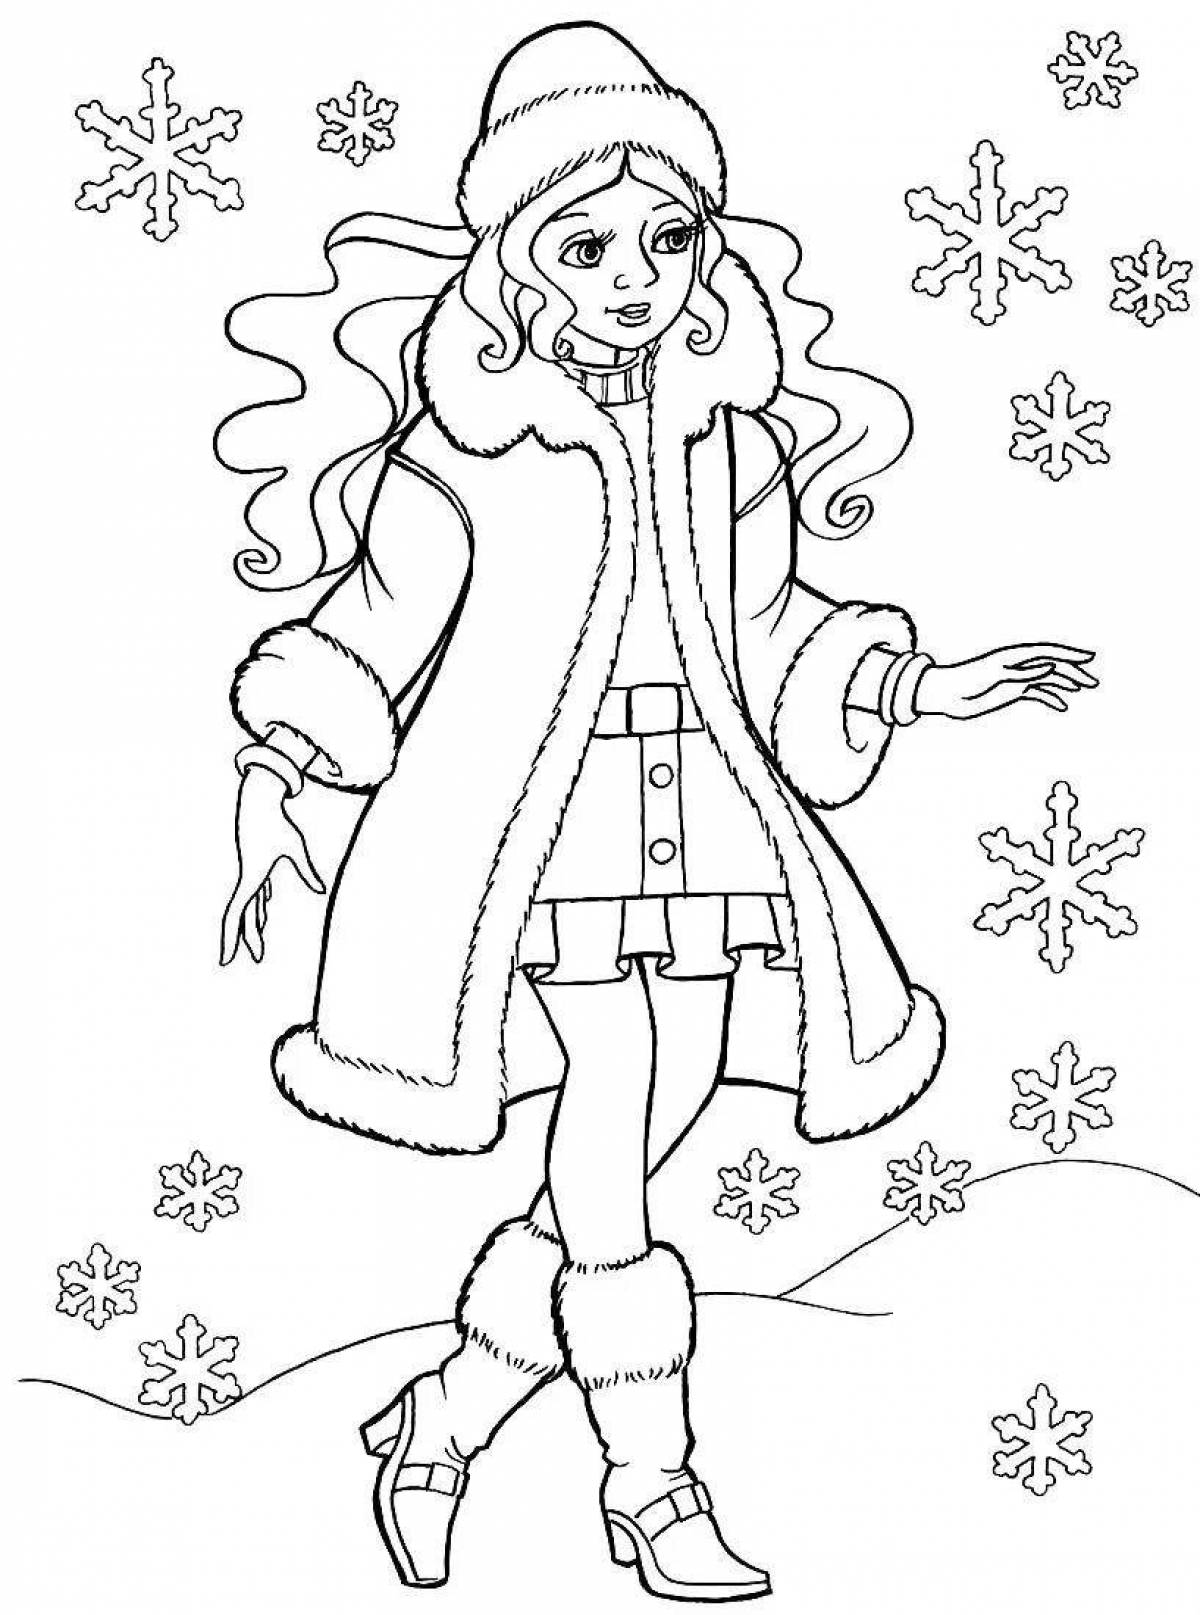 Charming coloring book for girls snow maiden